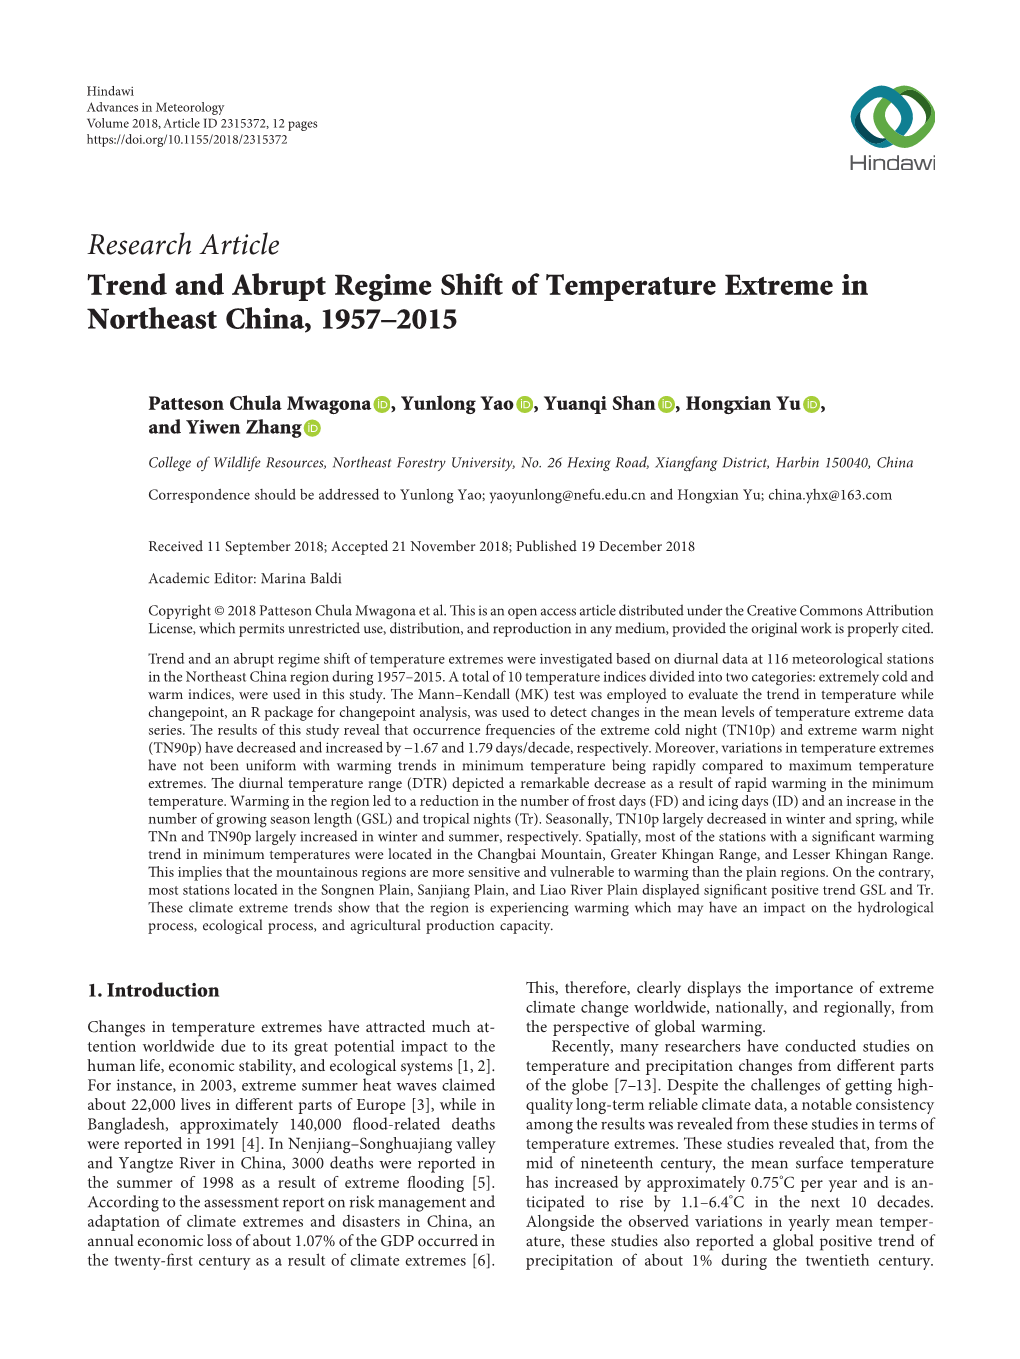 Trend and Abrupt Regime Shift of Temperature Extreme in Northeast China, 1957–2015